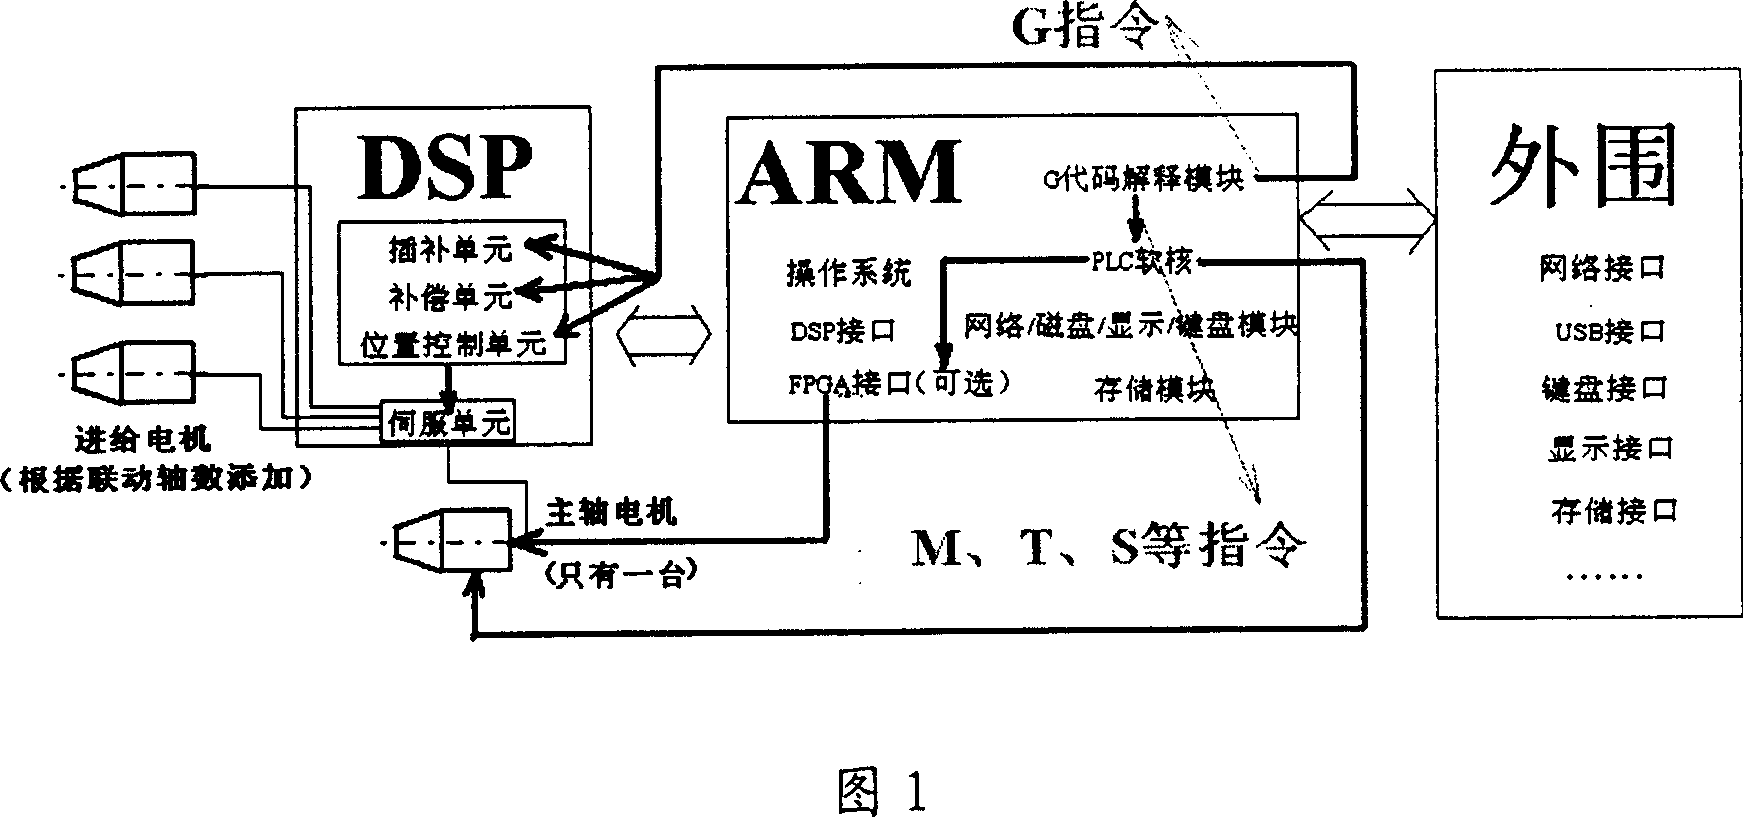 Inlaid numerical control system based on ARM and DSP